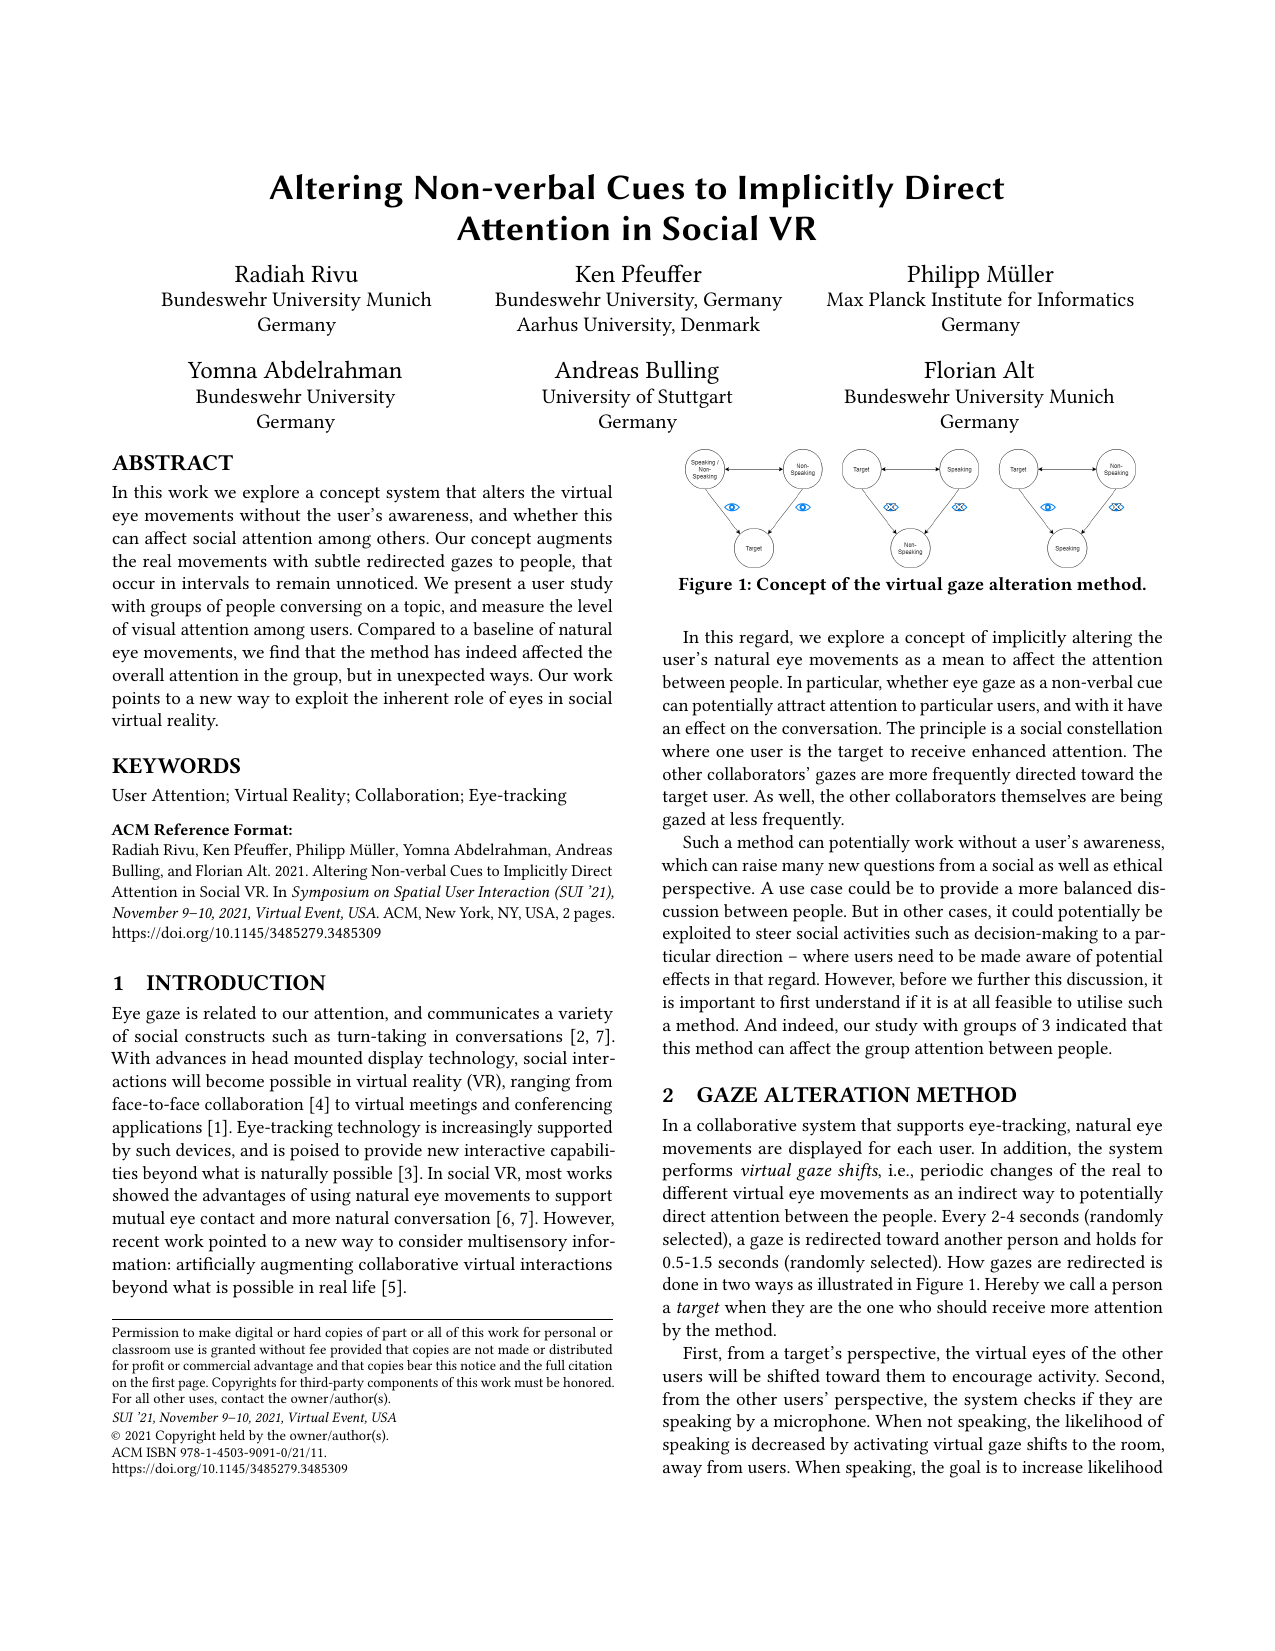 Altering Non-verbal Cues to Implicitly Direct Attention in Social VR